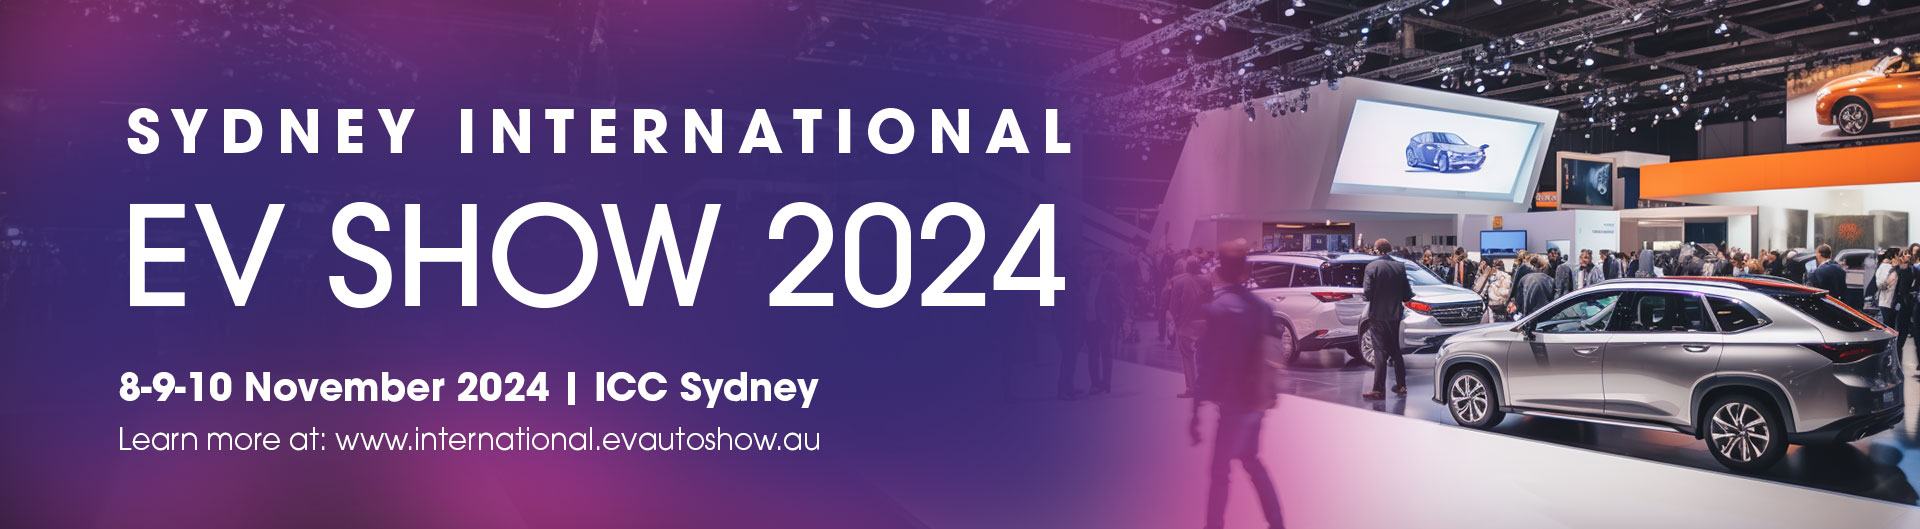 Sydney International EV Show is coming to ICC Sydney on 8 to 10 November 2024.